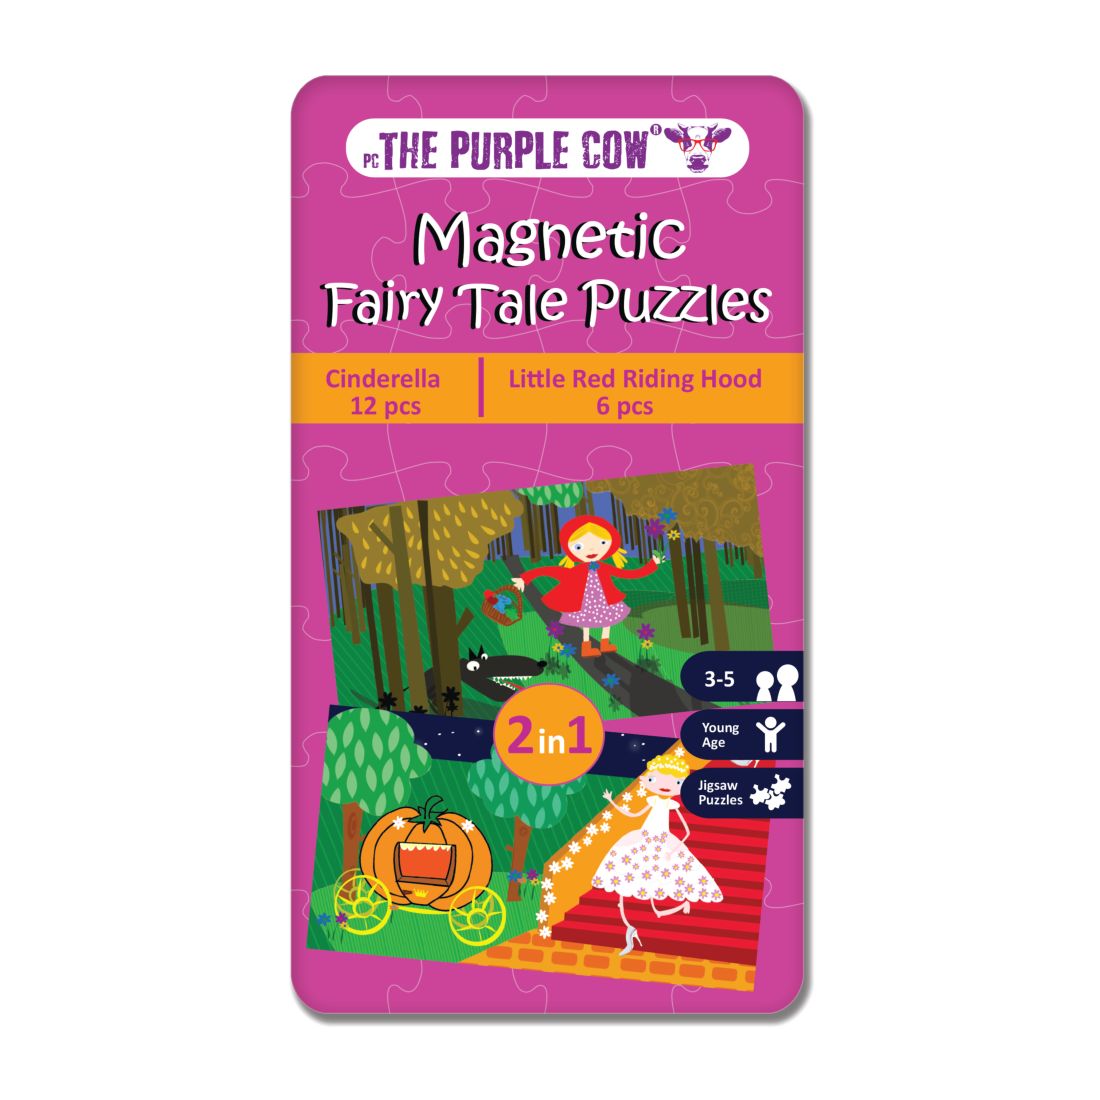 The Purple Cow Magnetic Fairy Tale Puzzles Cinderella & Little Red Riding Hood Travel Game